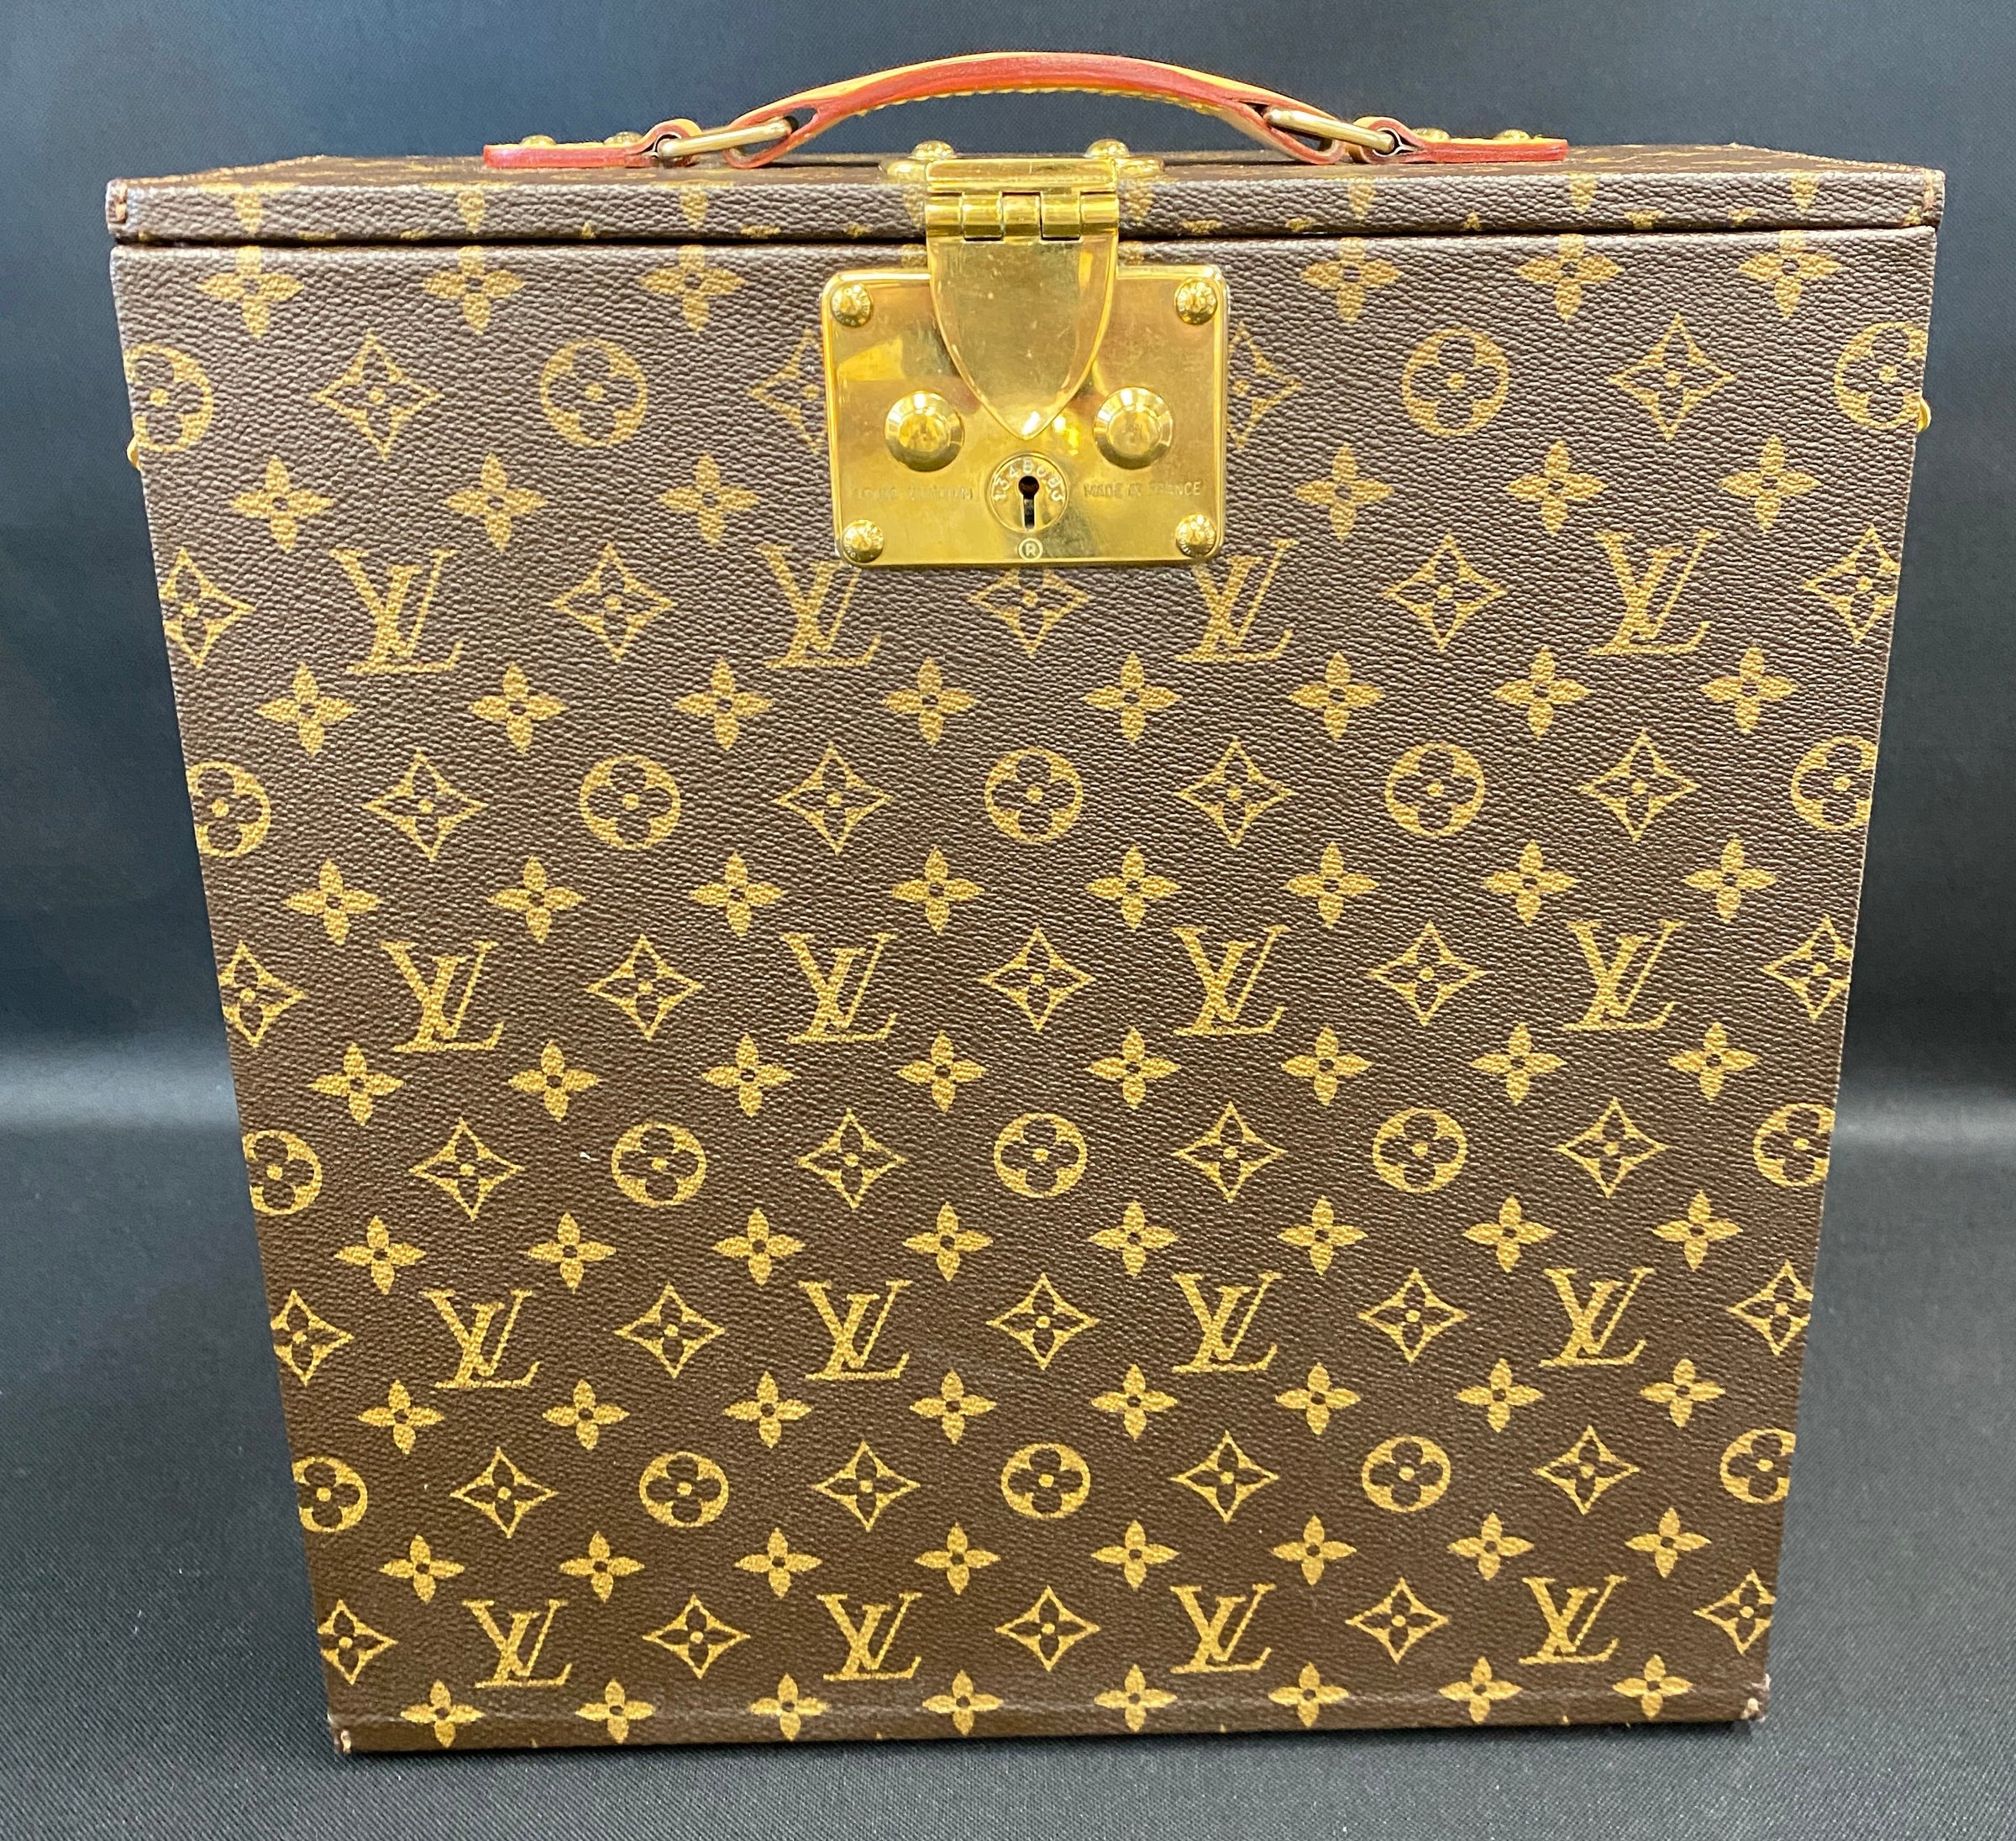 Louis Vuitton Single Bottle Wine Case with two glasses